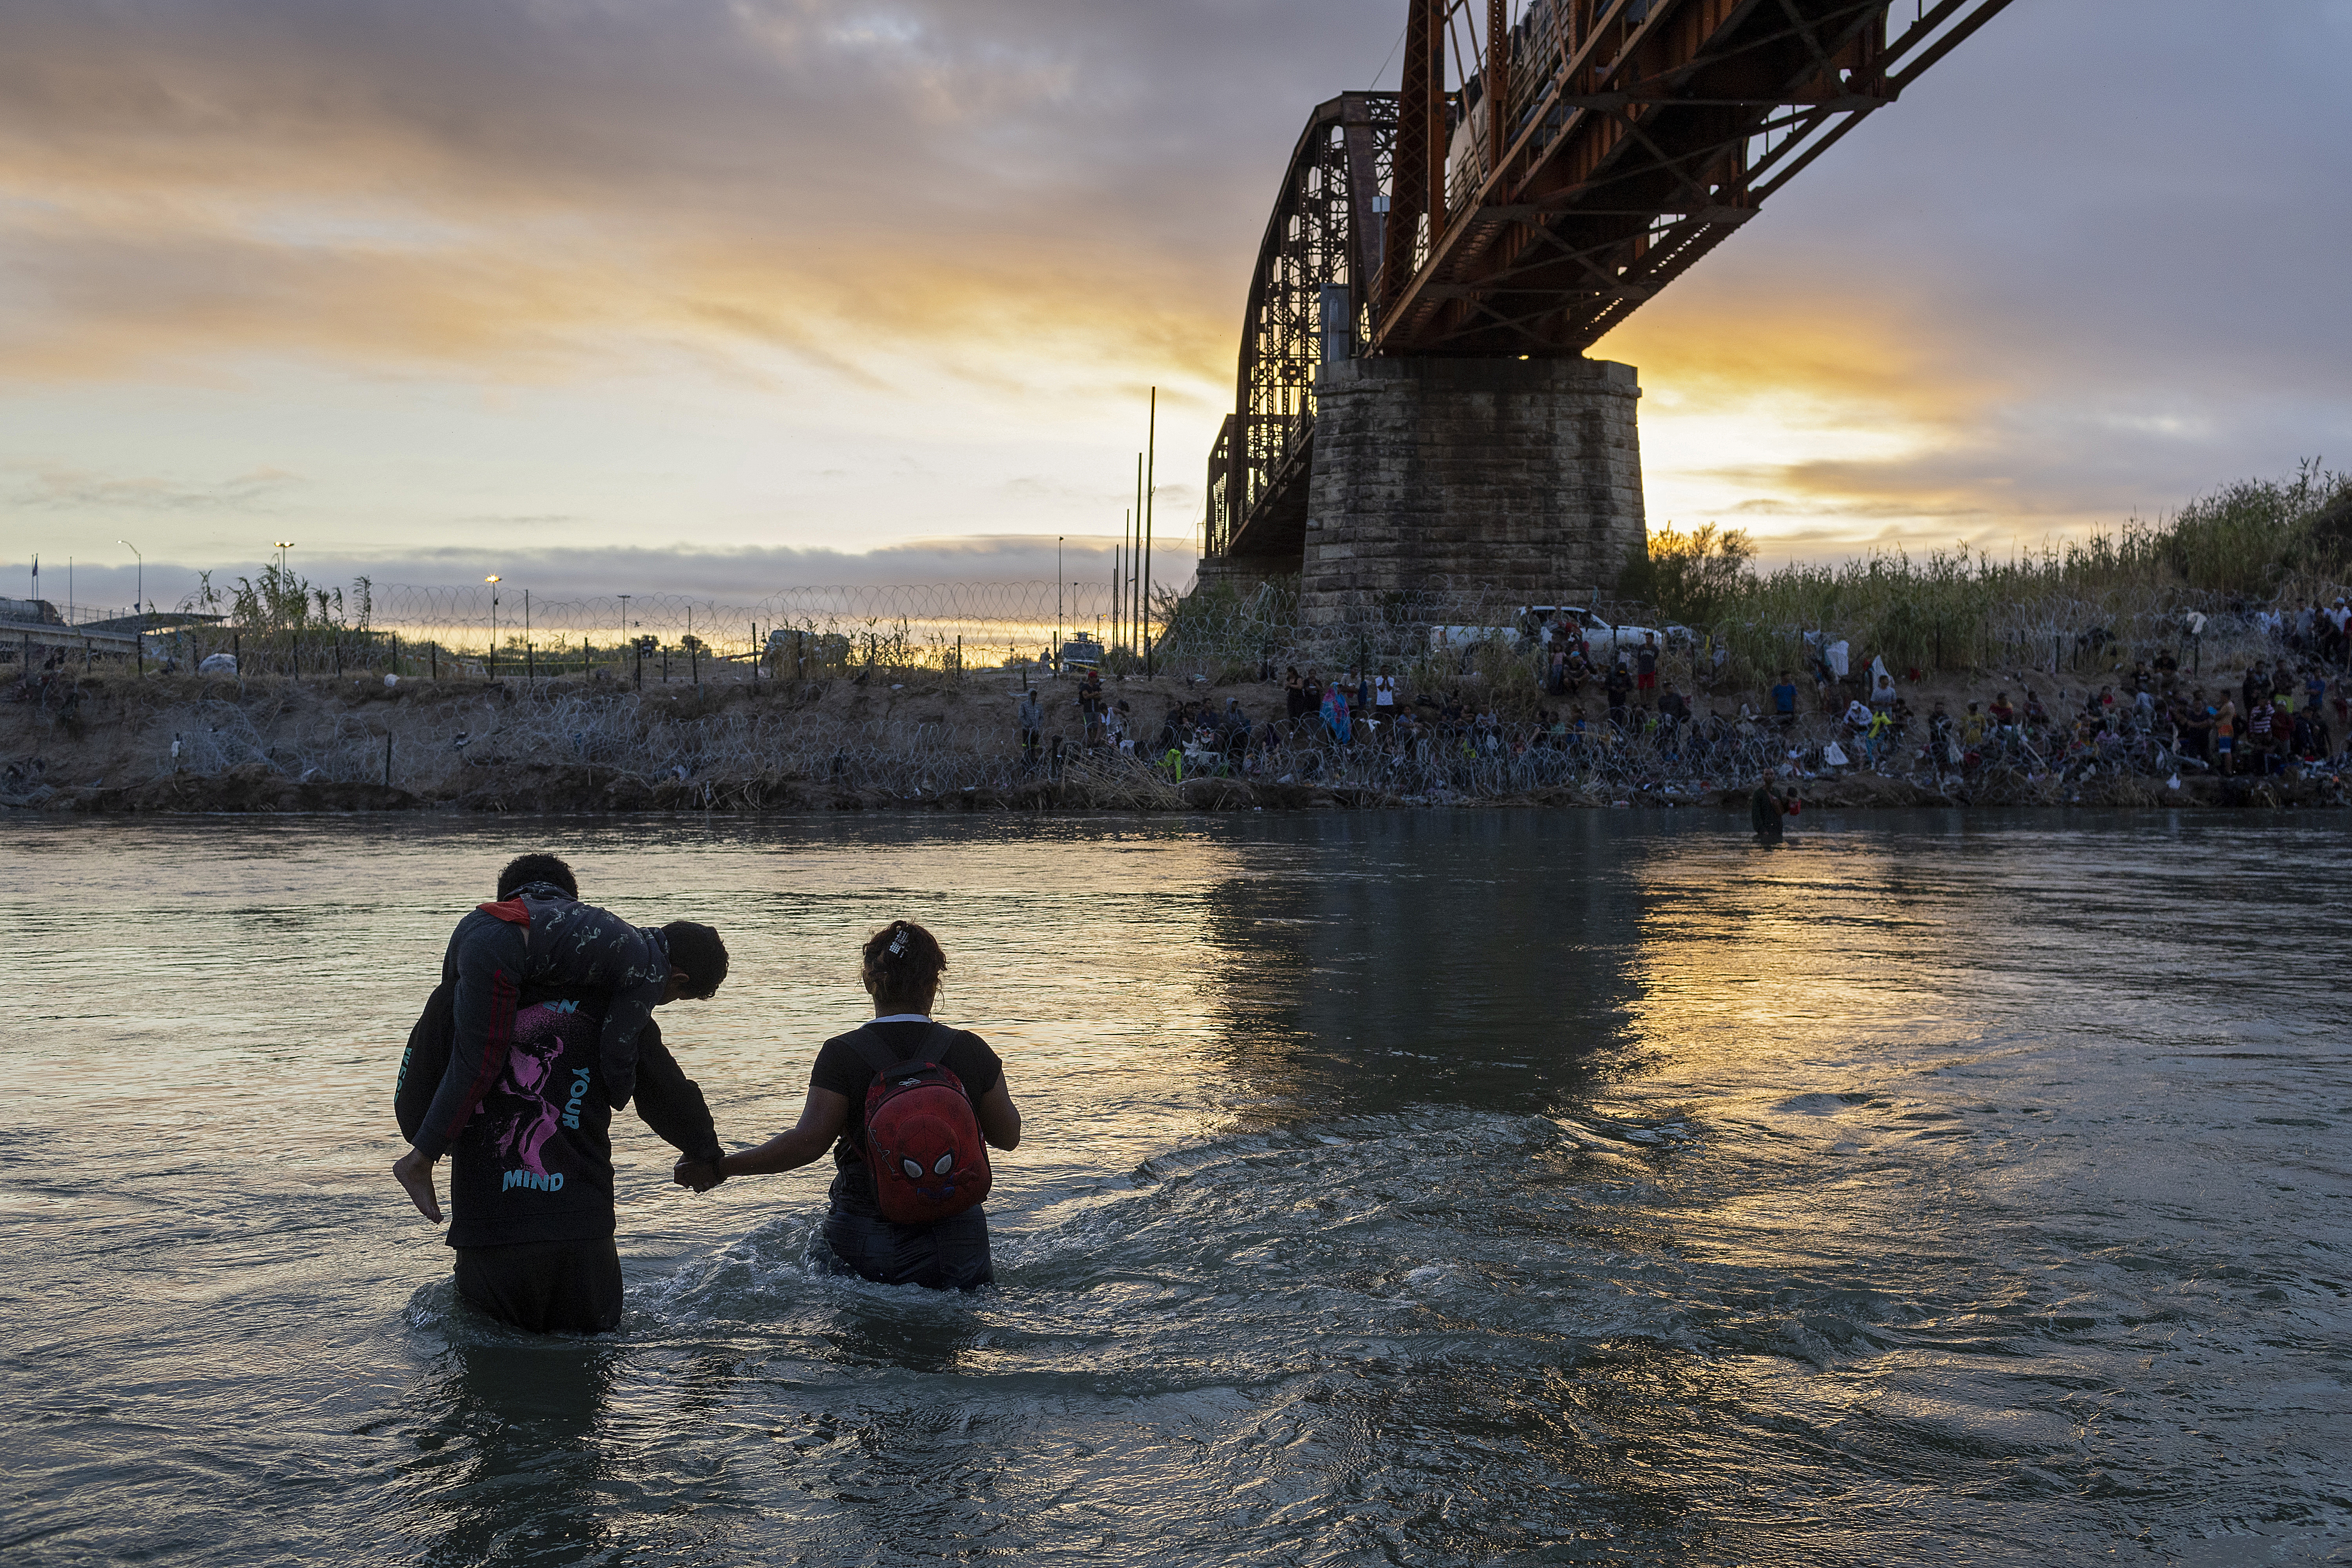 People holding hands while wading across a wide river below a bridge, at dusk.